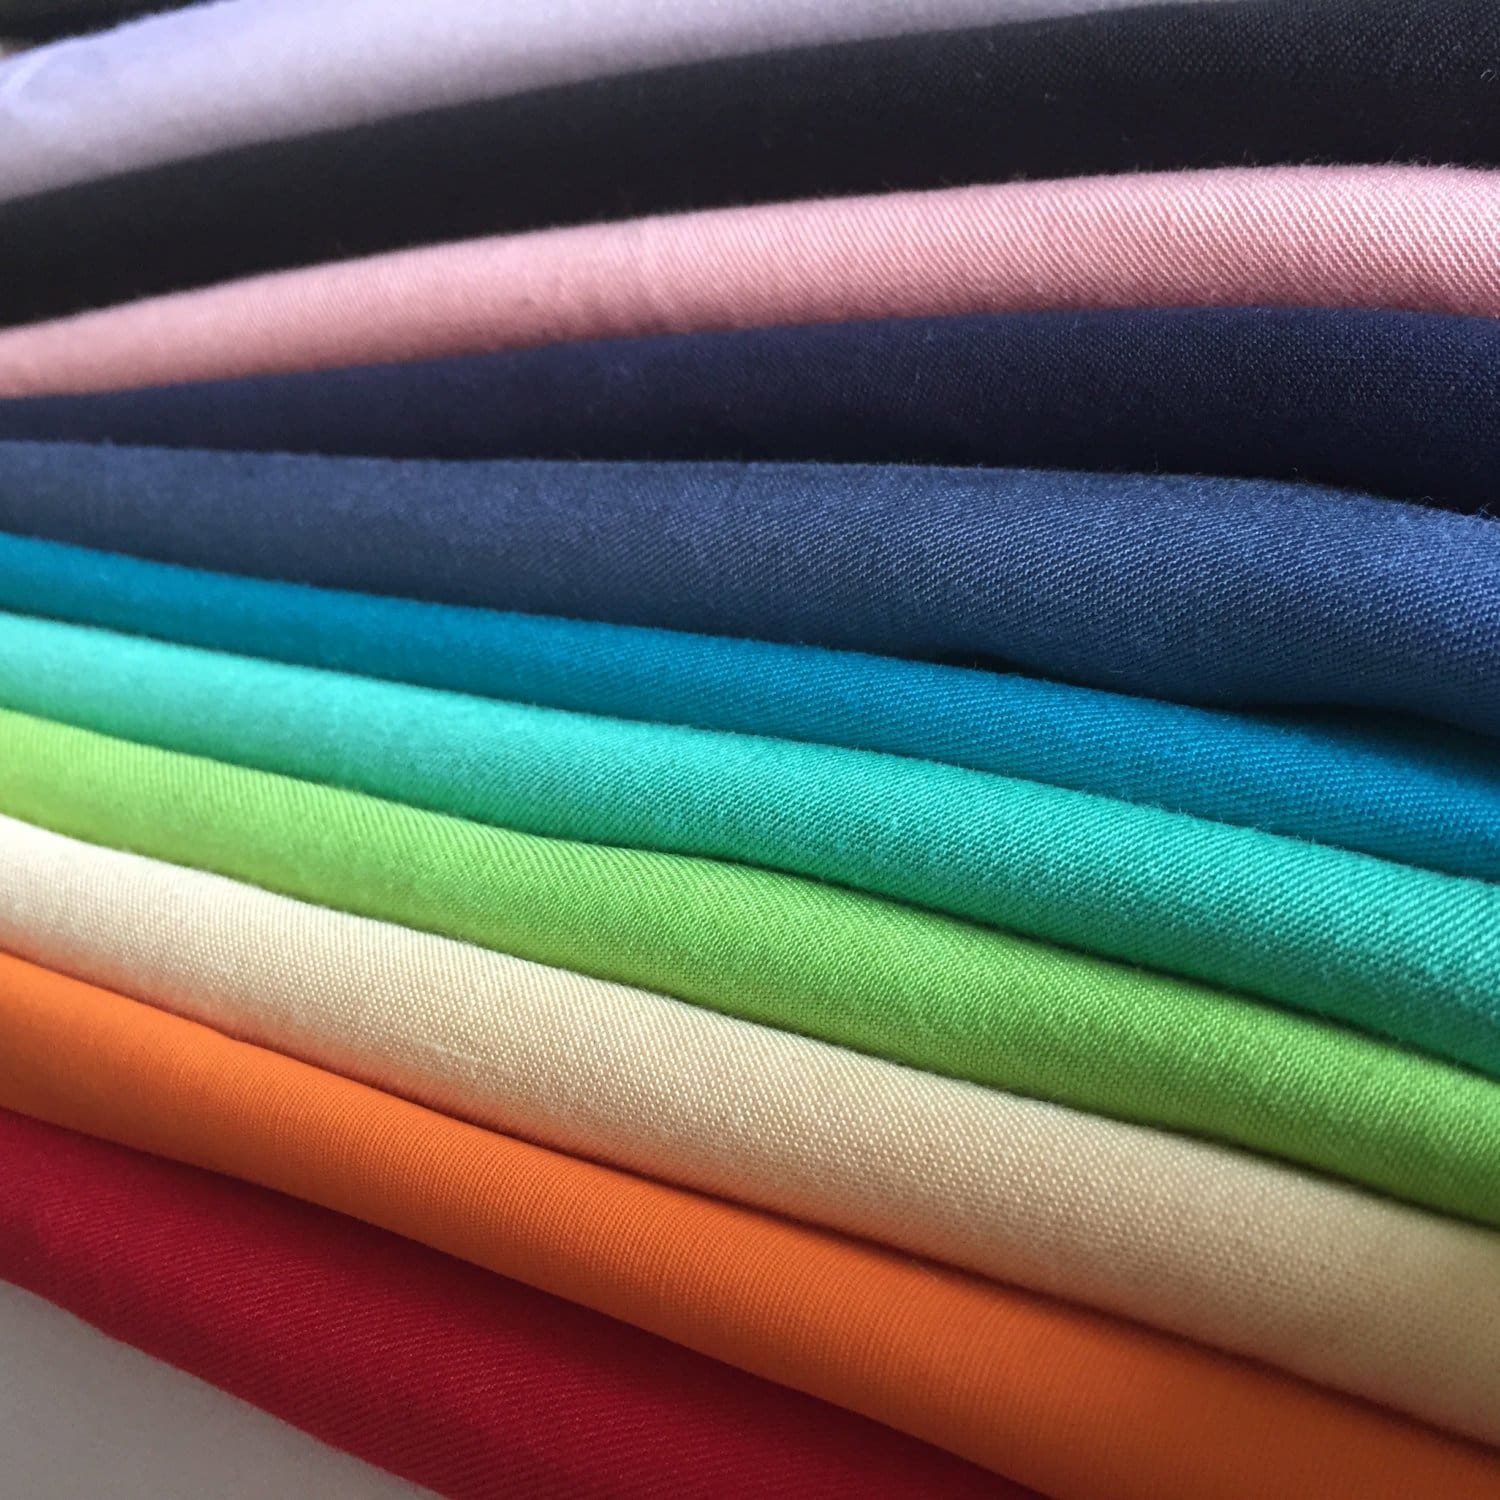  100% NATURAL COTTON CANVAS MEDIUM WEIGHT Fabric For